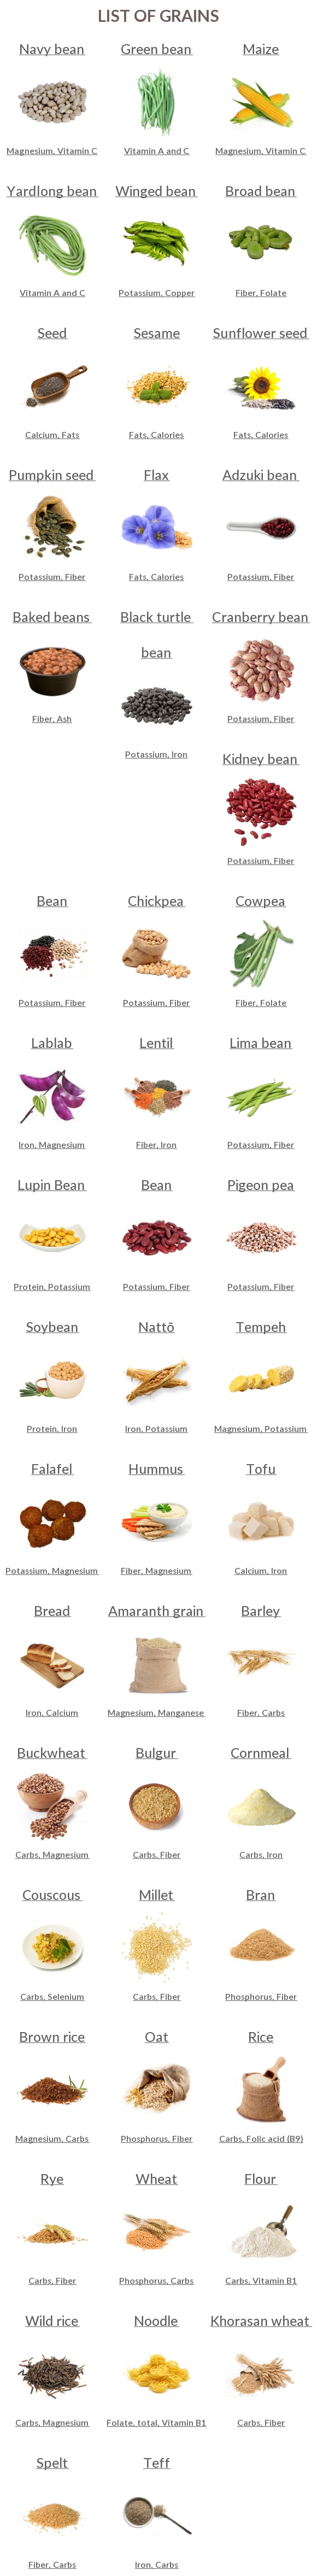 Grains full list with names, images and nutrition info